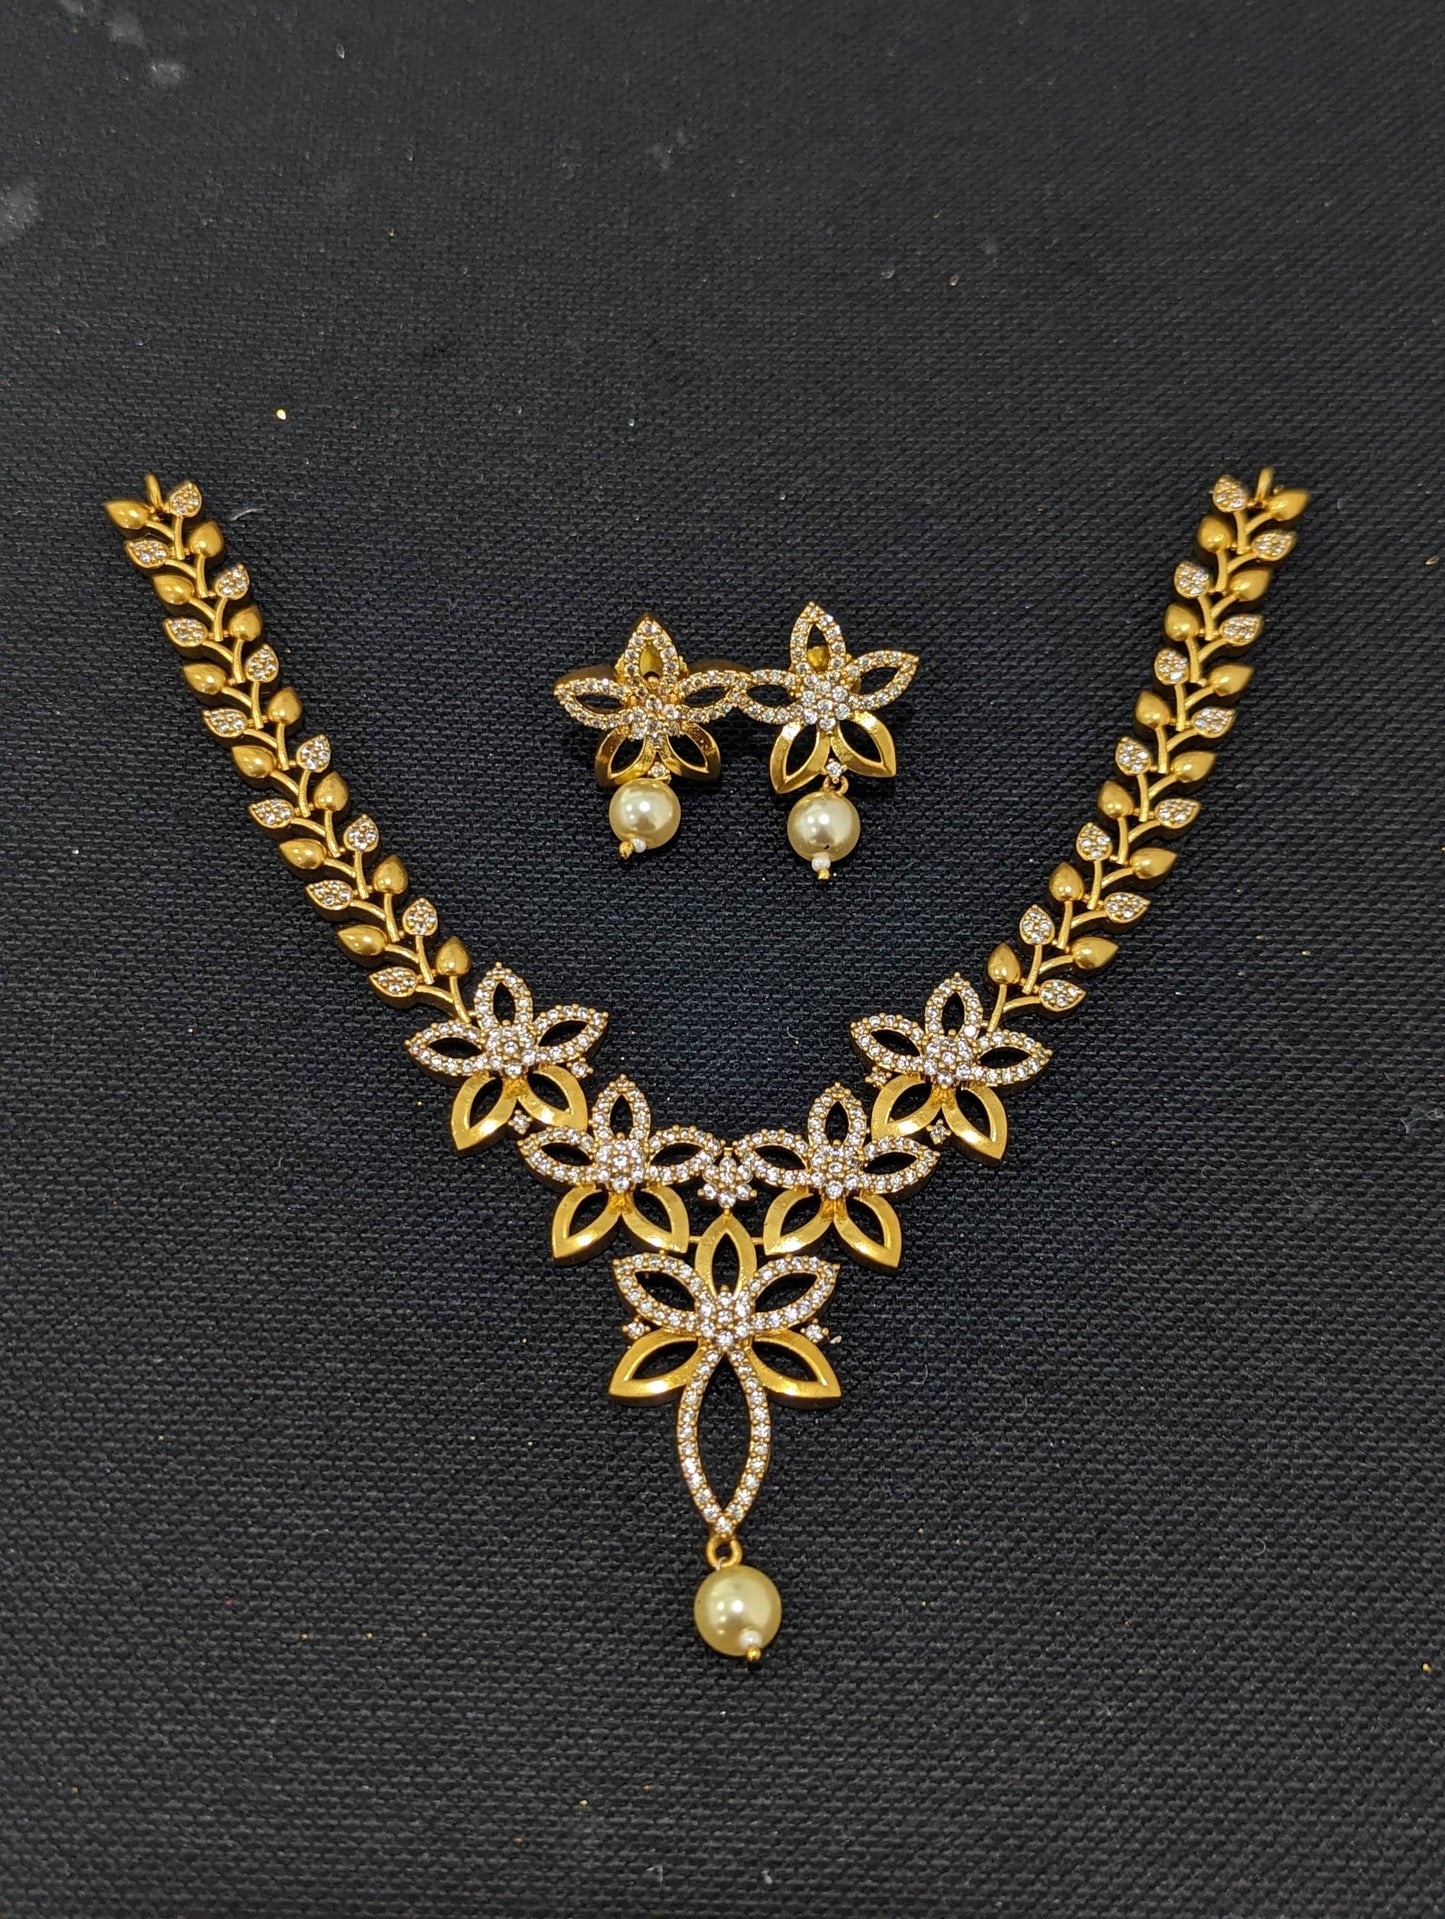 Antique Leafy Flower CZ Necklace and Earrings set